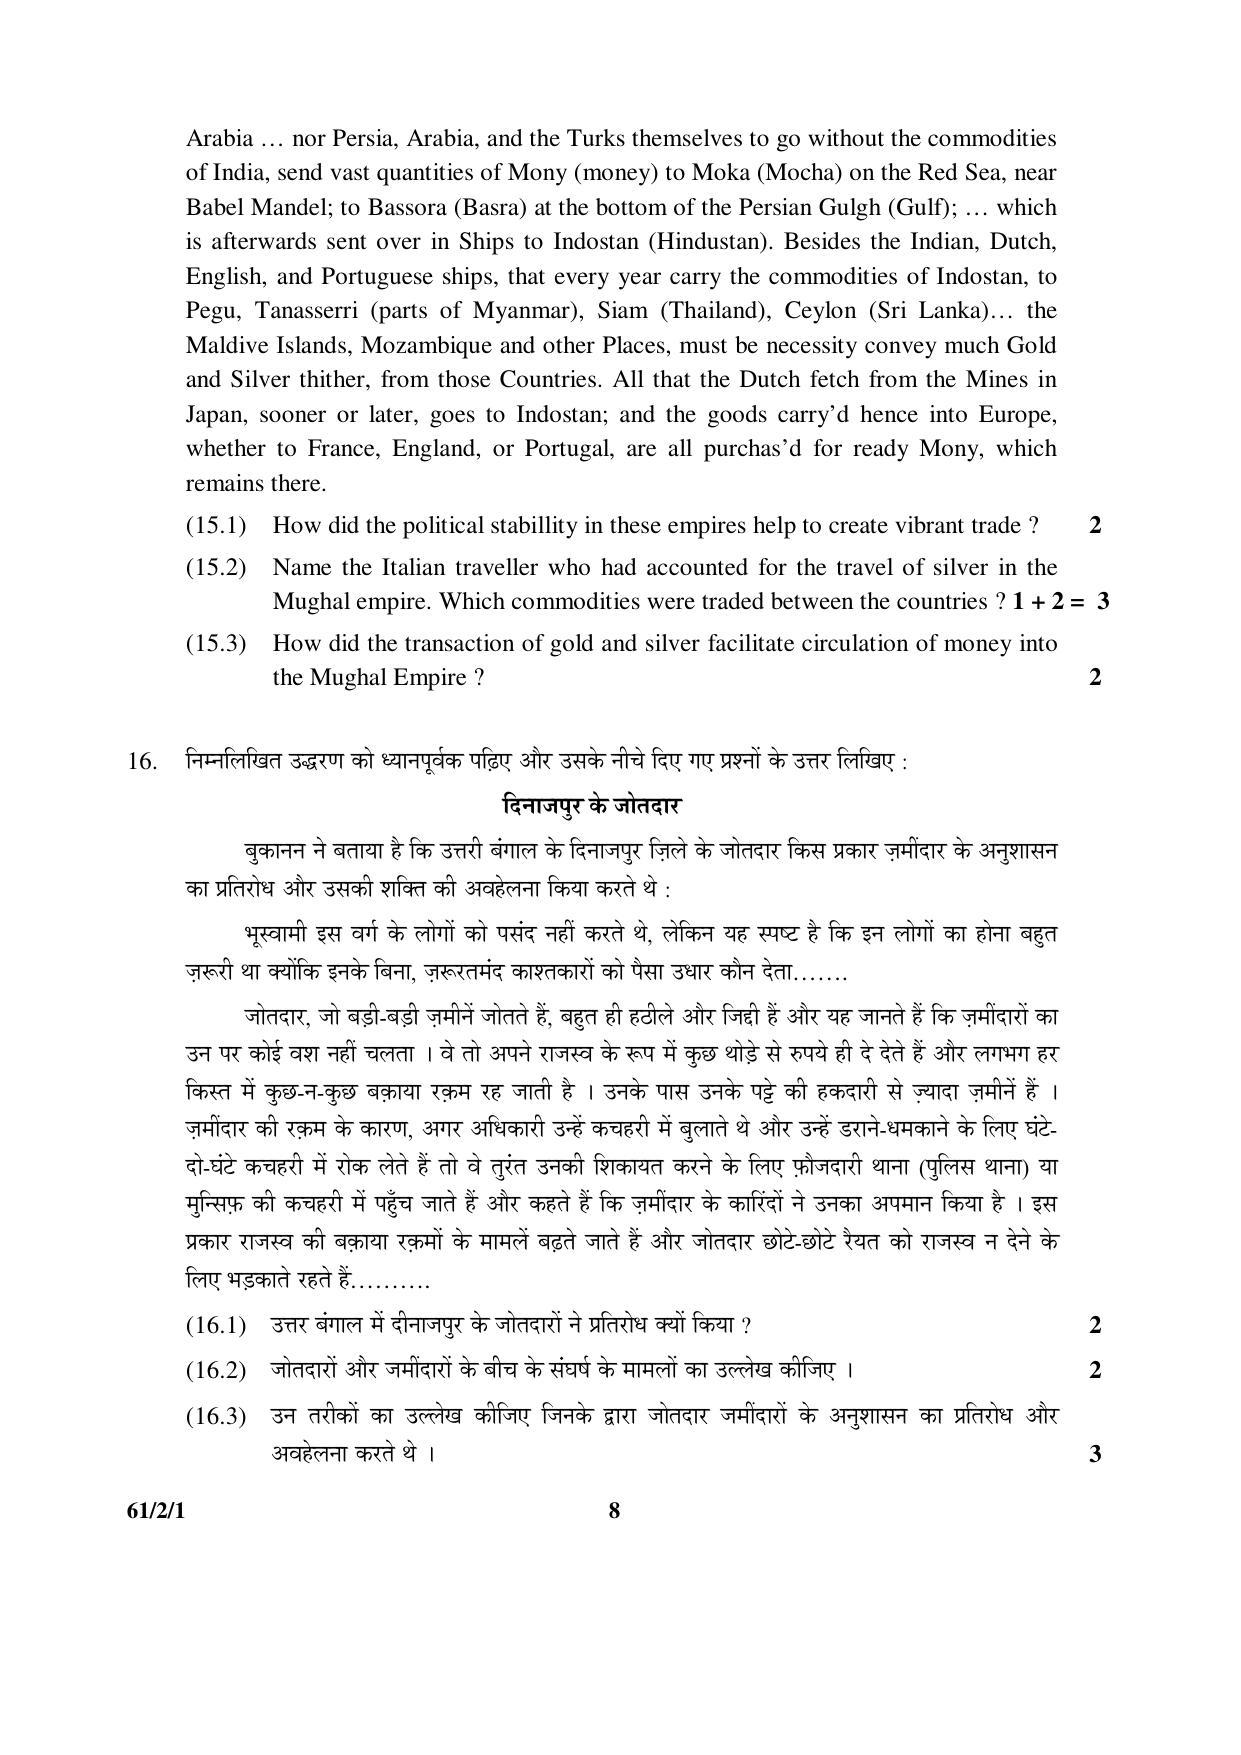 CBSE Class 12 61-2-1 History 2016 Question Paper - Page 8